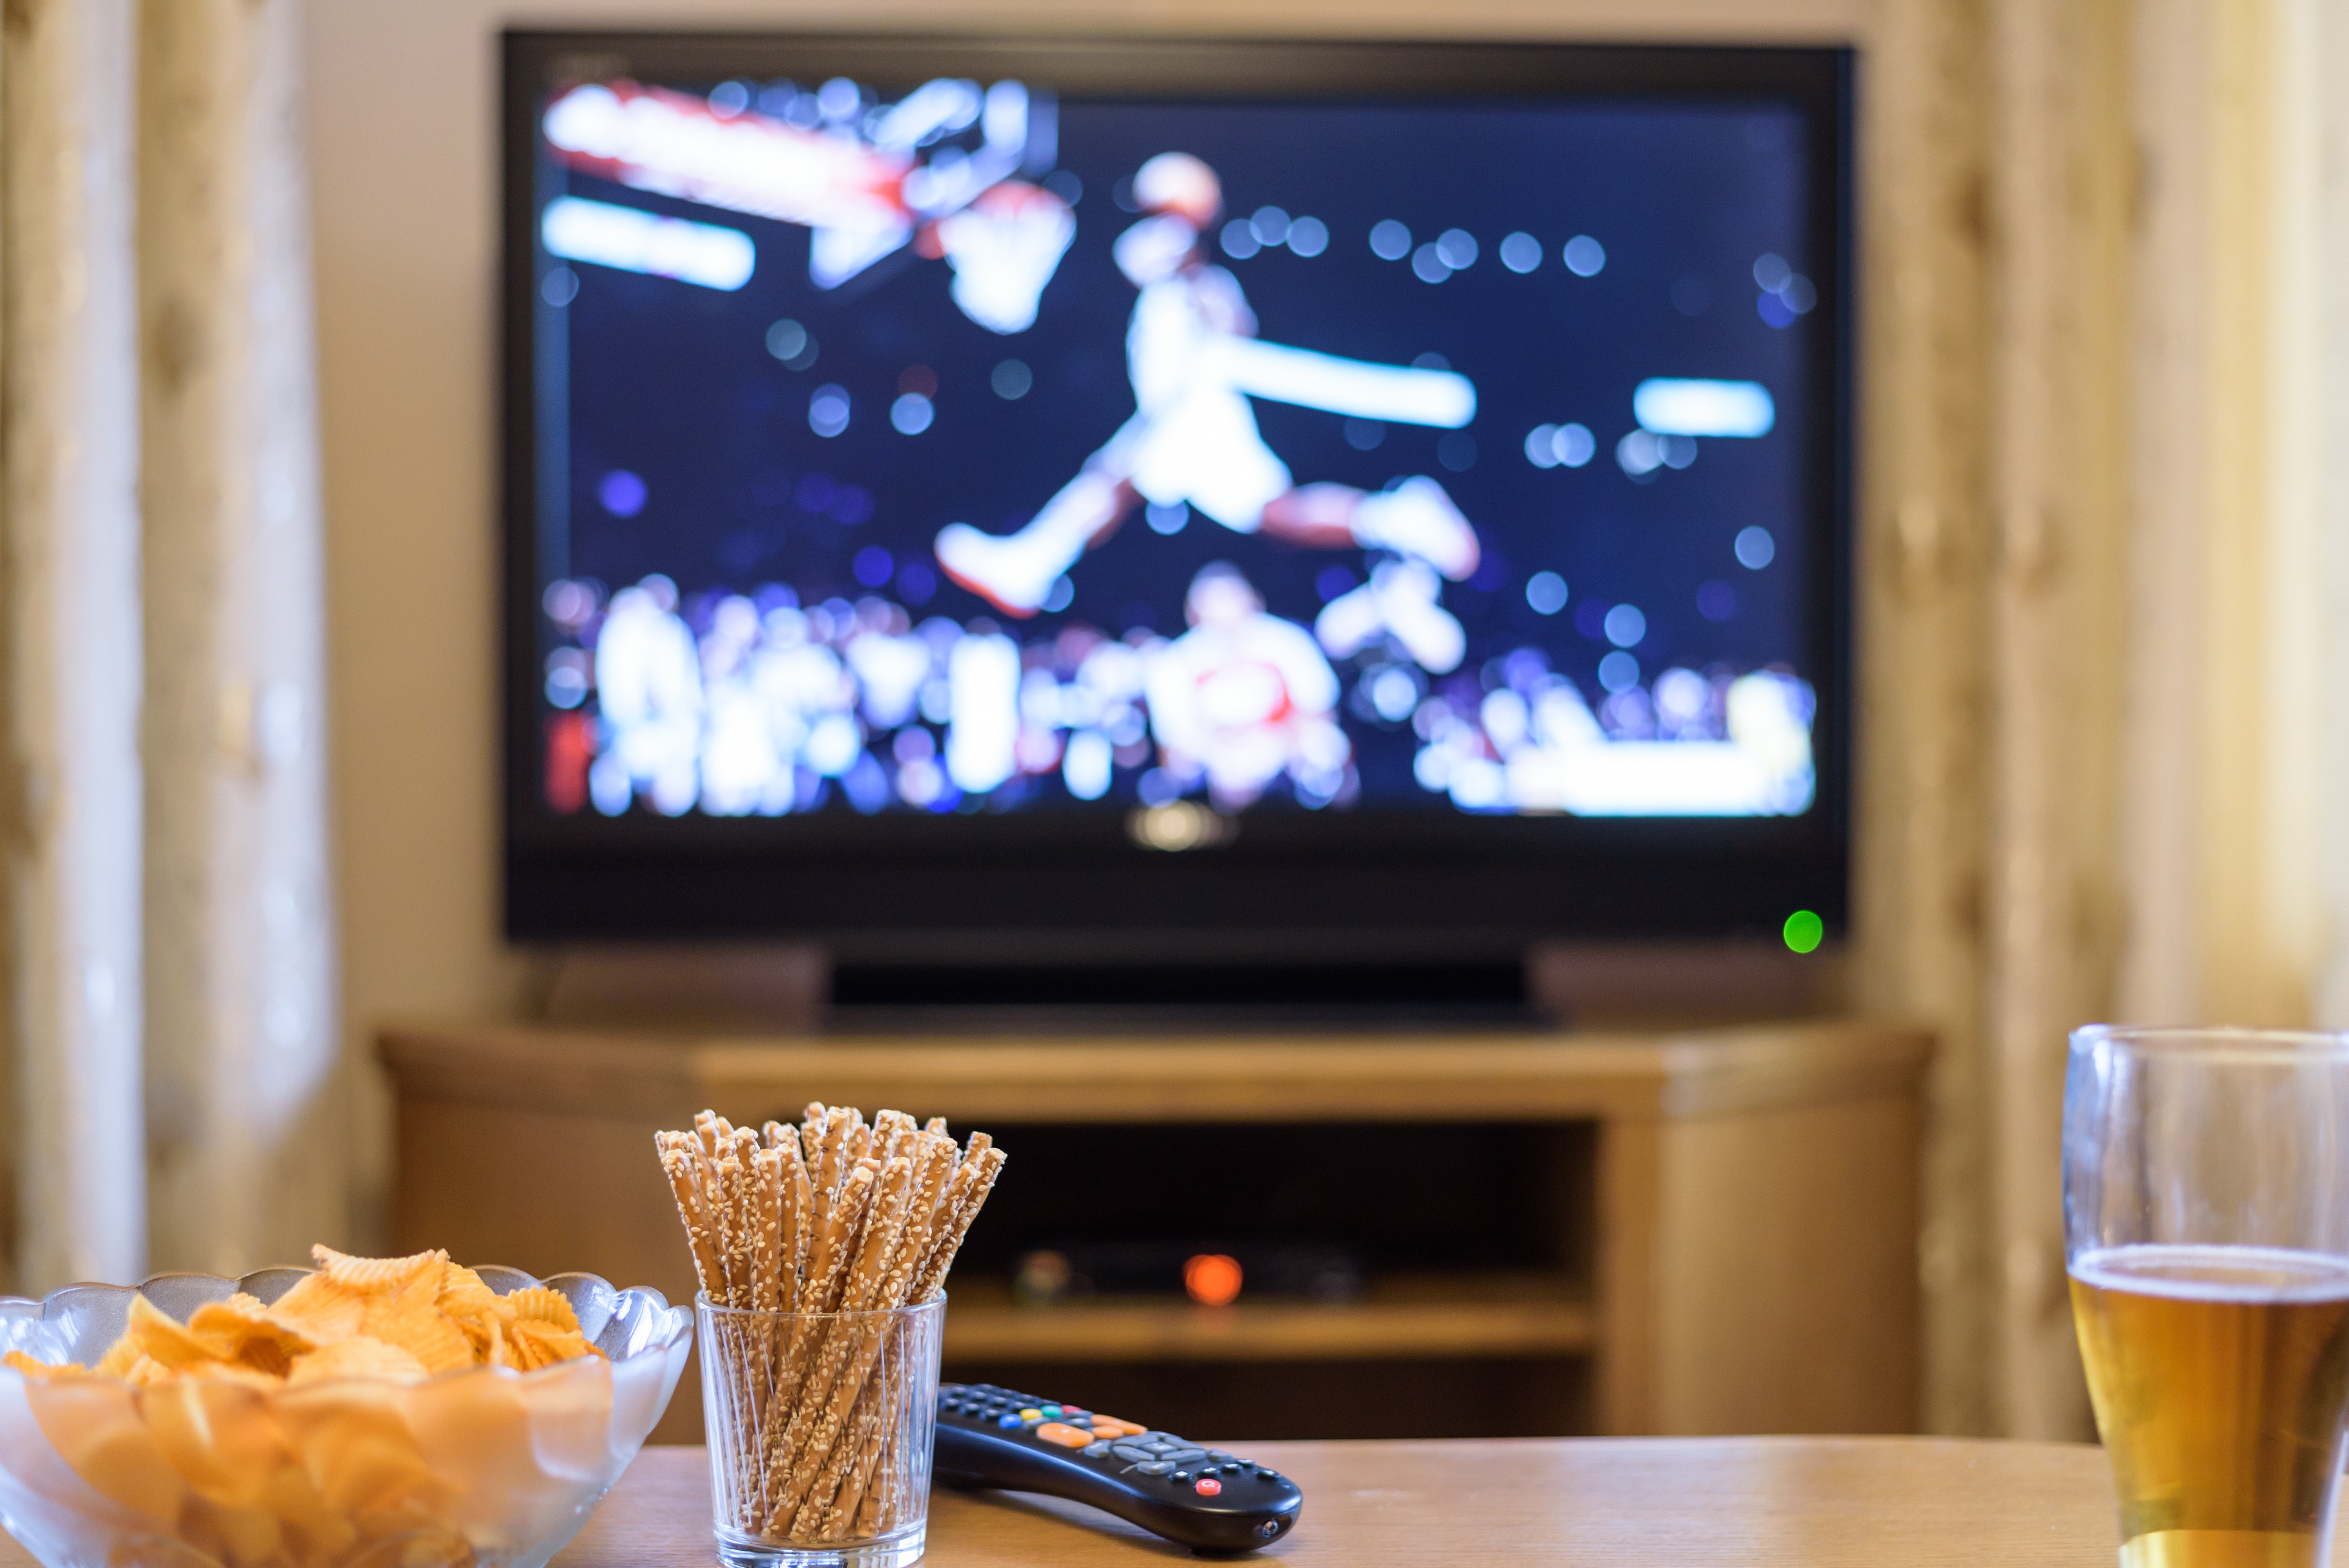 Television, TV watching (basketball game) with snacks. | Source: Shutterstock